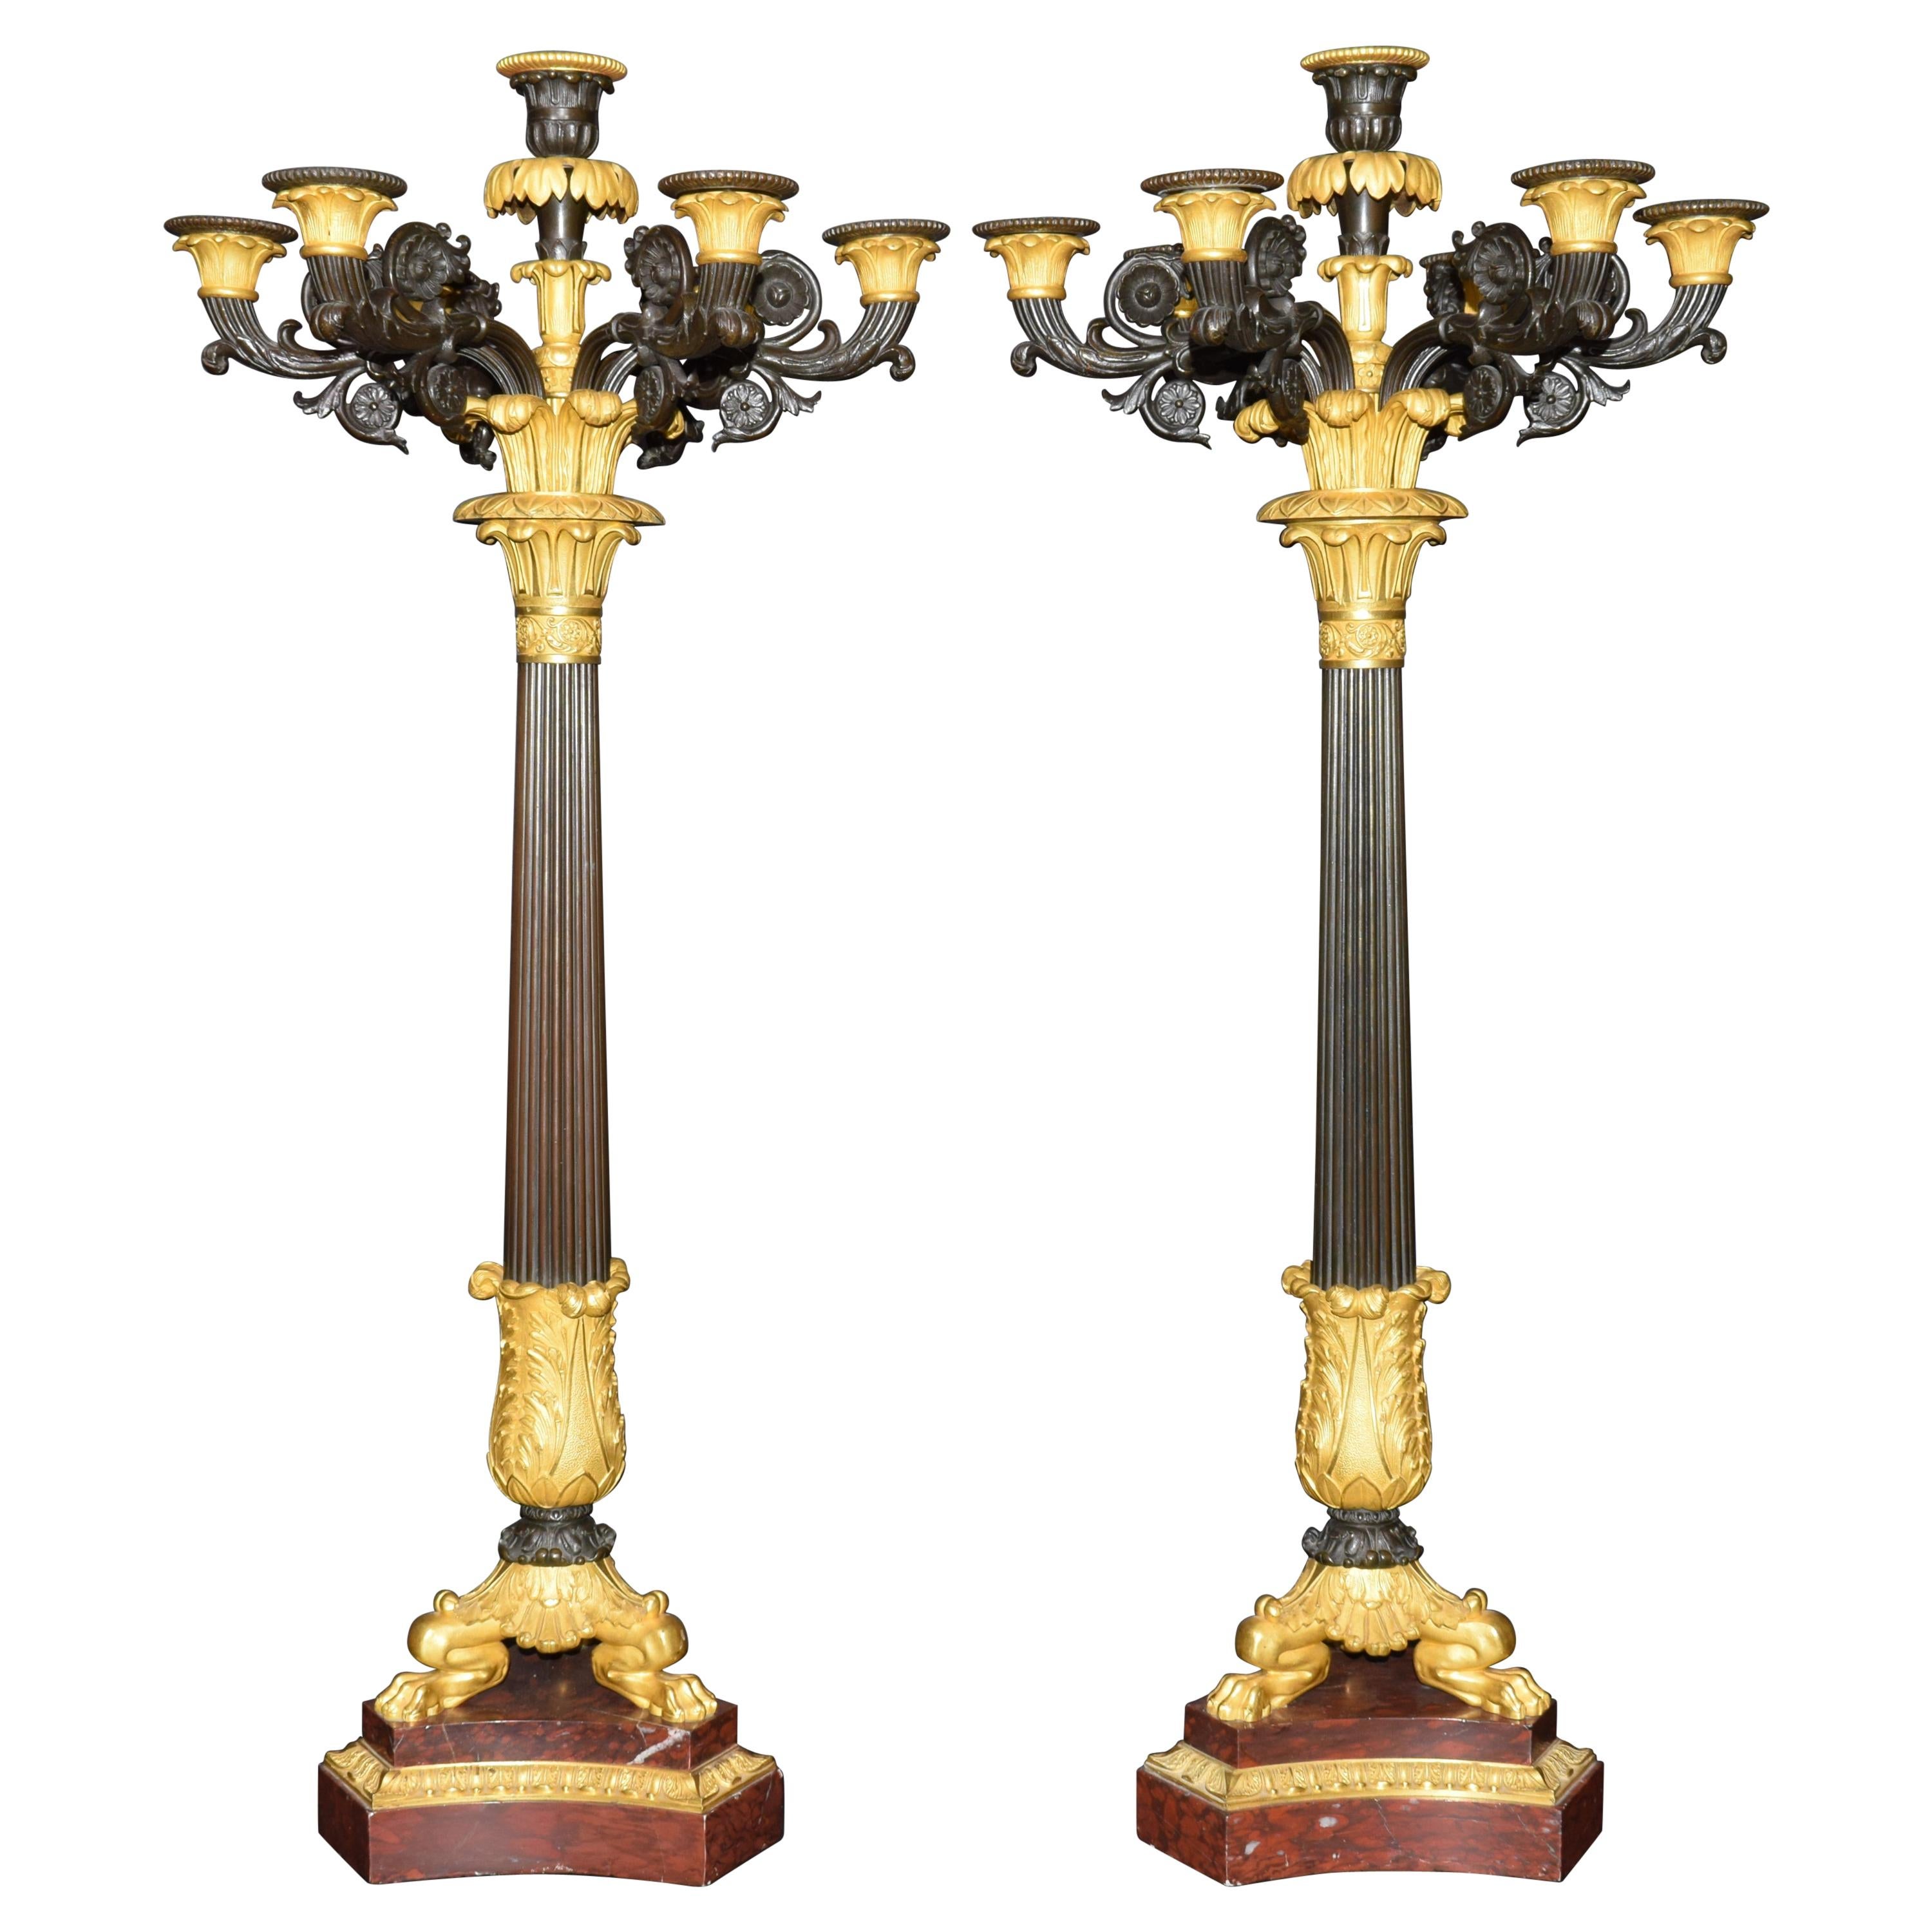 Pair of Gilt Bronze Candlesticks on Marble